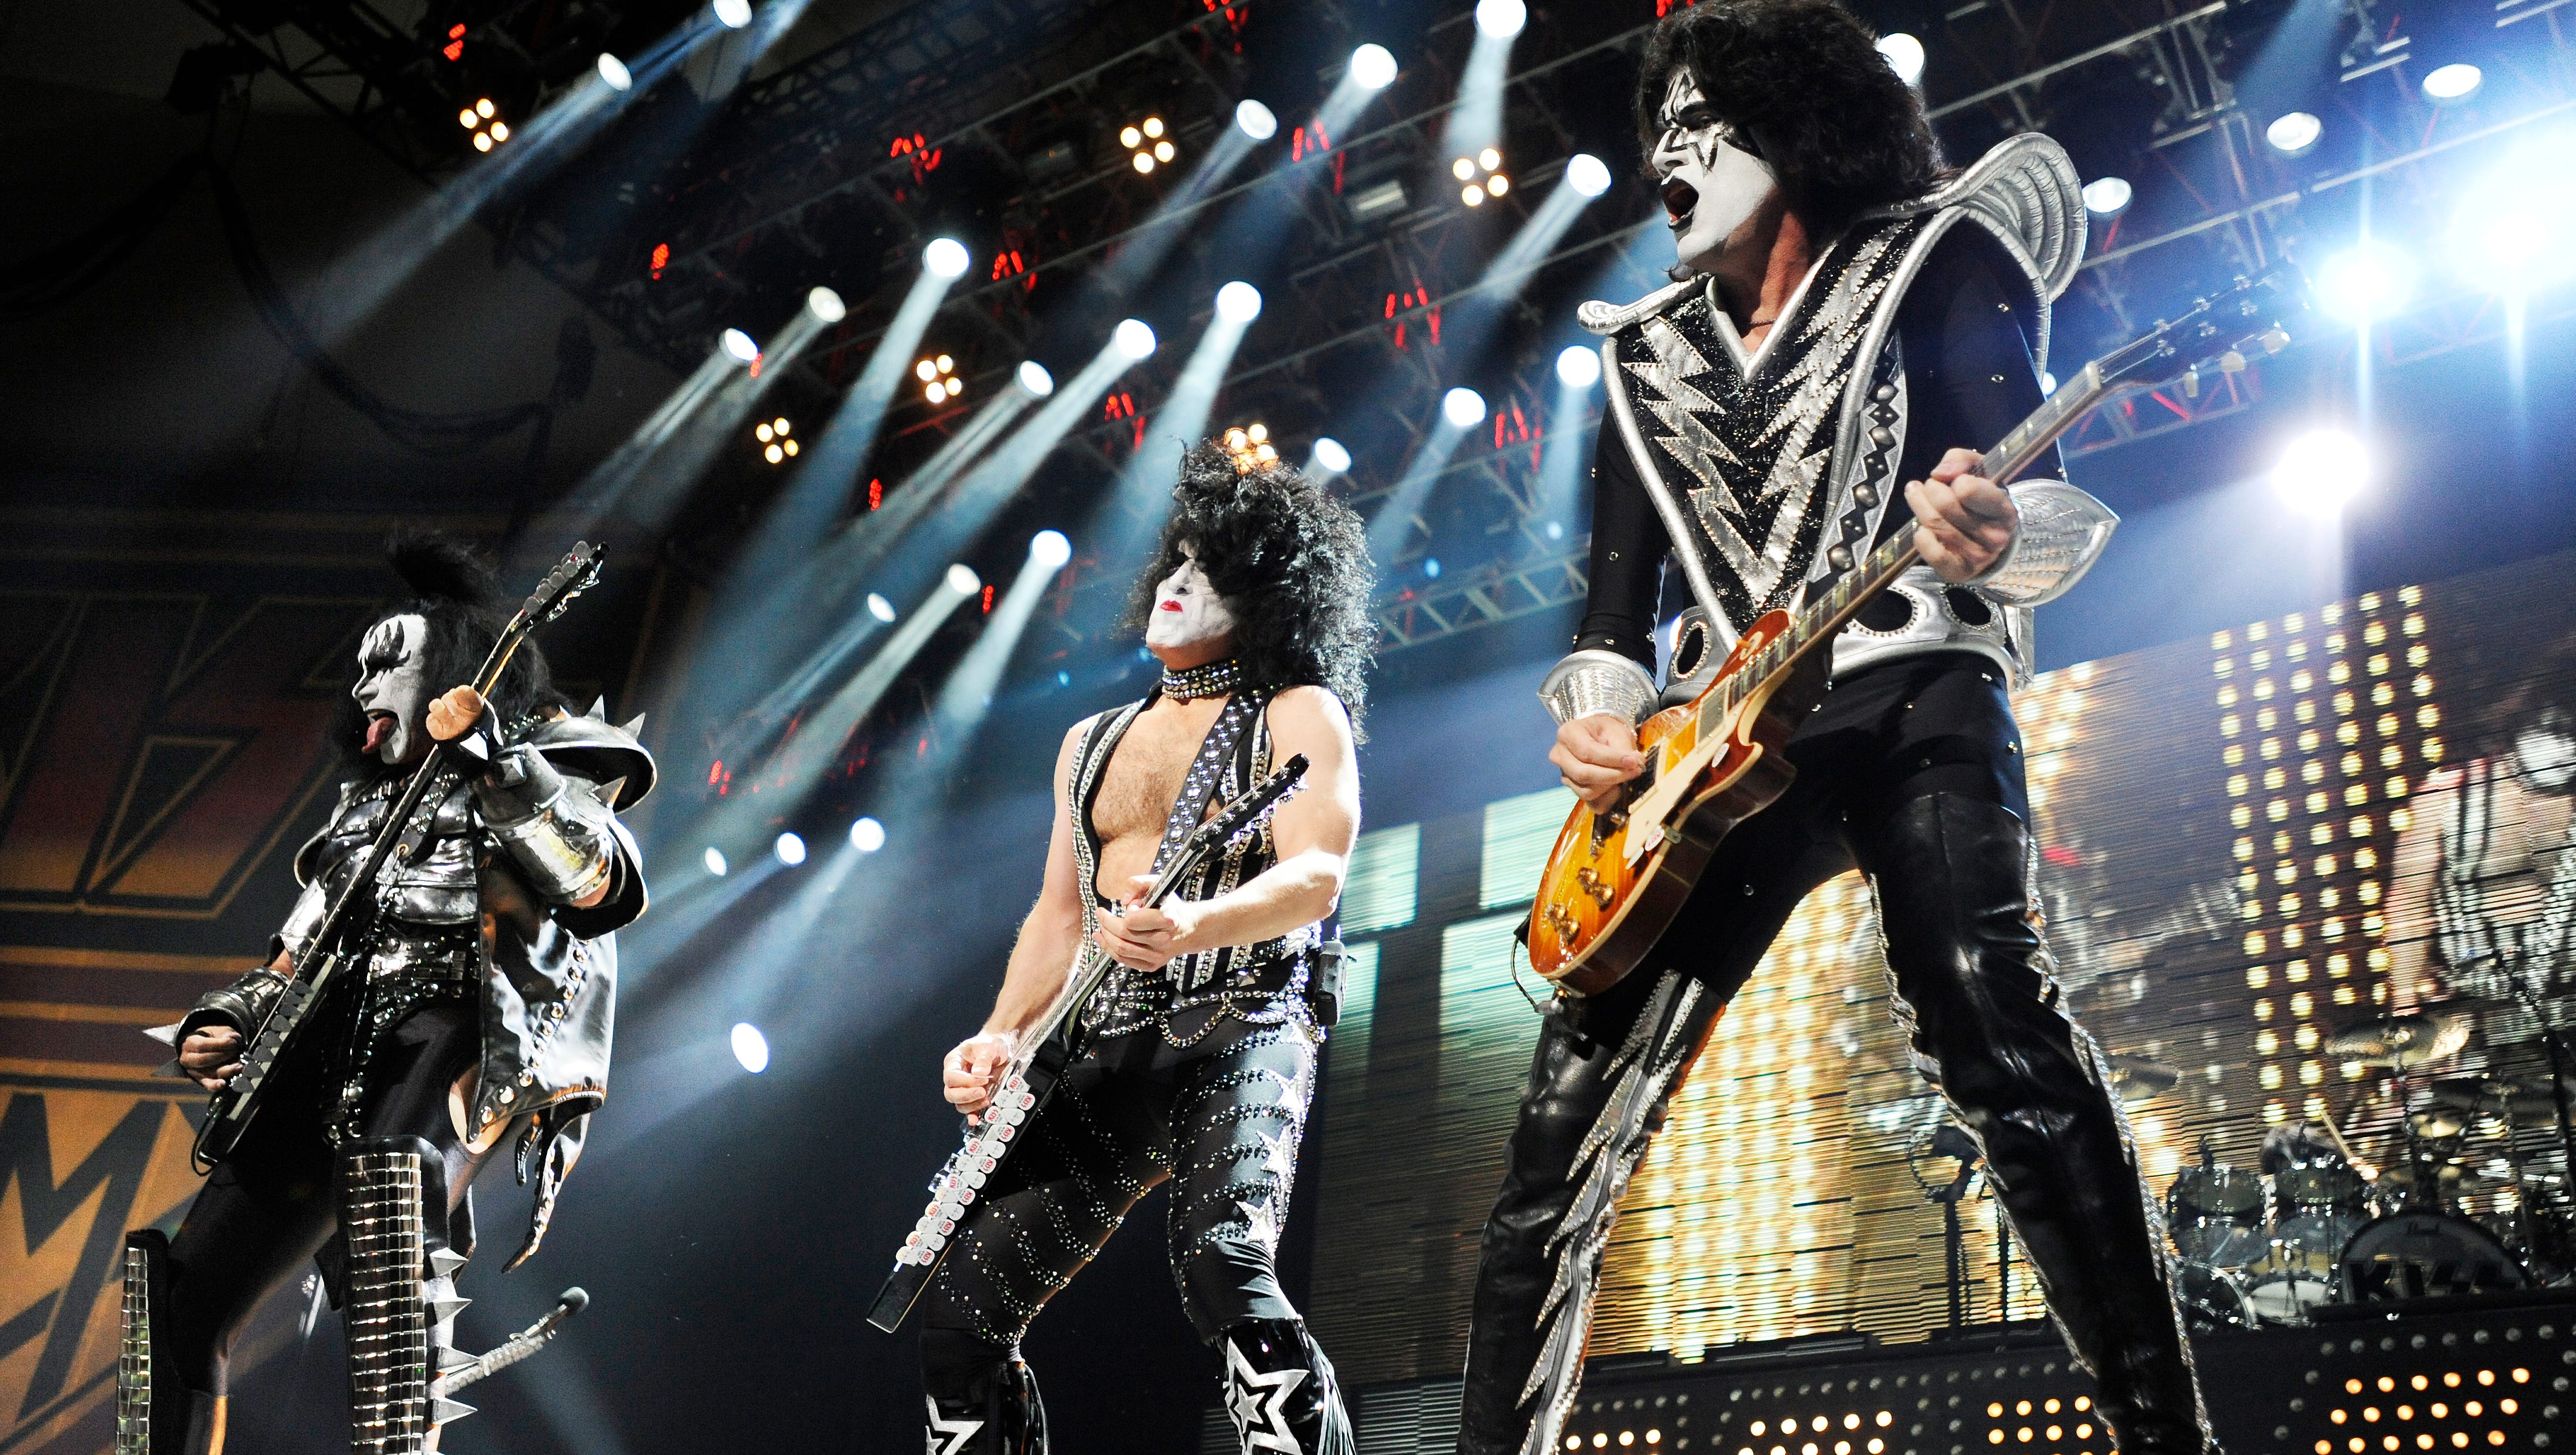 KISS members,from left, Gene Simmons, Paul Stanley and Tommy Thayer (in the role of Ace Frehley) perform at Cobo Arena on Sept. 25, 2009. Legendary rock-n-roll band KISS returned to Cobo to kick off their KISS Alive 35 tour. Much of the band's "Alive!" album, which launched them to superstardom, was recorded during concerts at Cobo Arena in 1975.